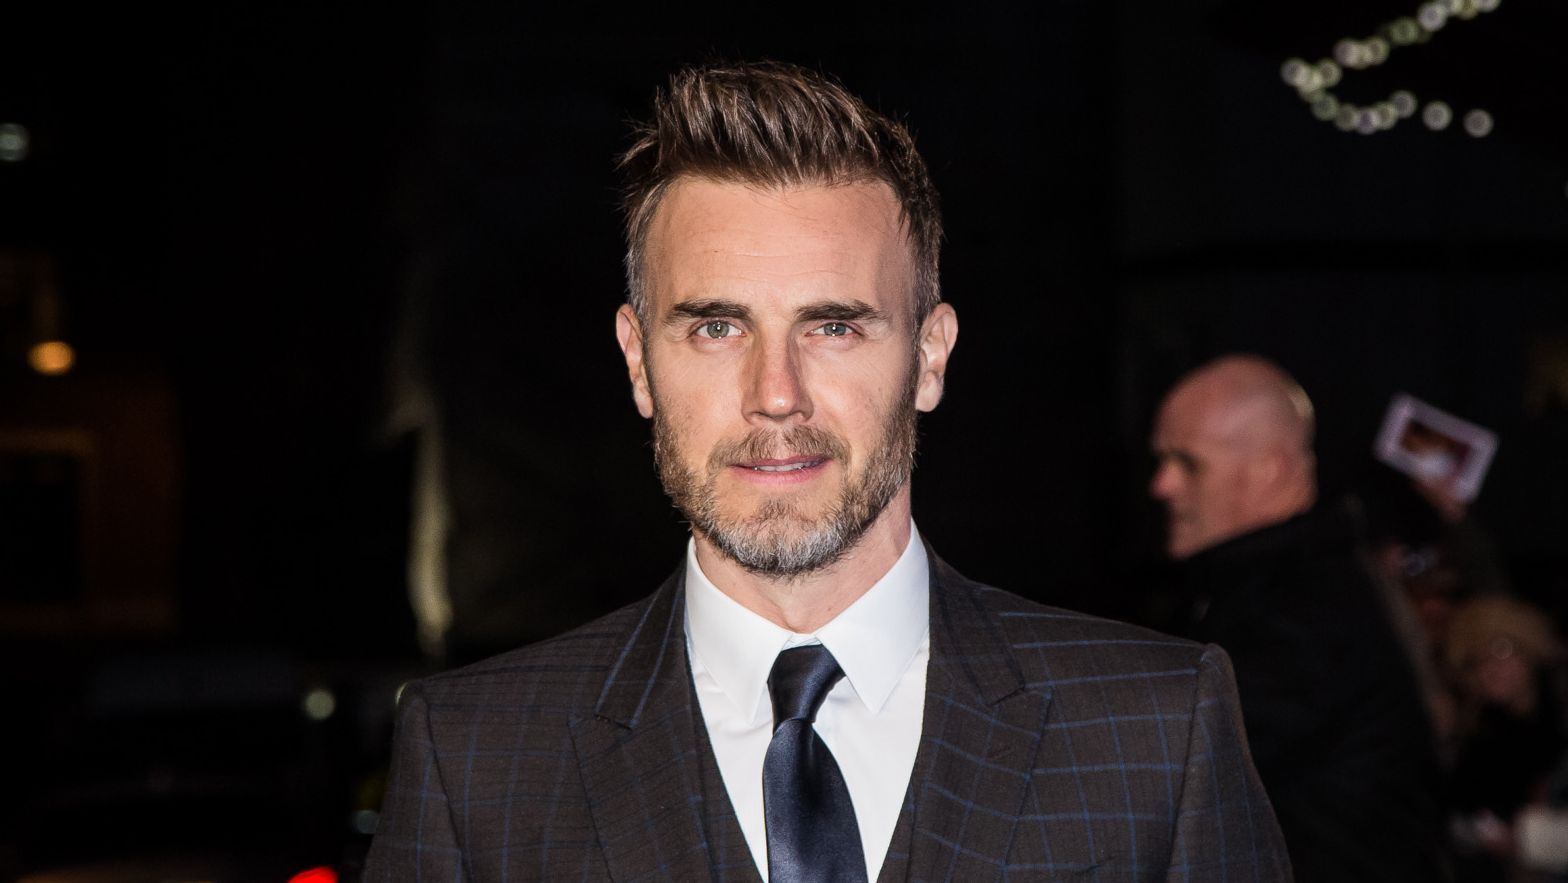 Gary Barlow Opens Up About The Tragic Death Of His Daughter Celebrity